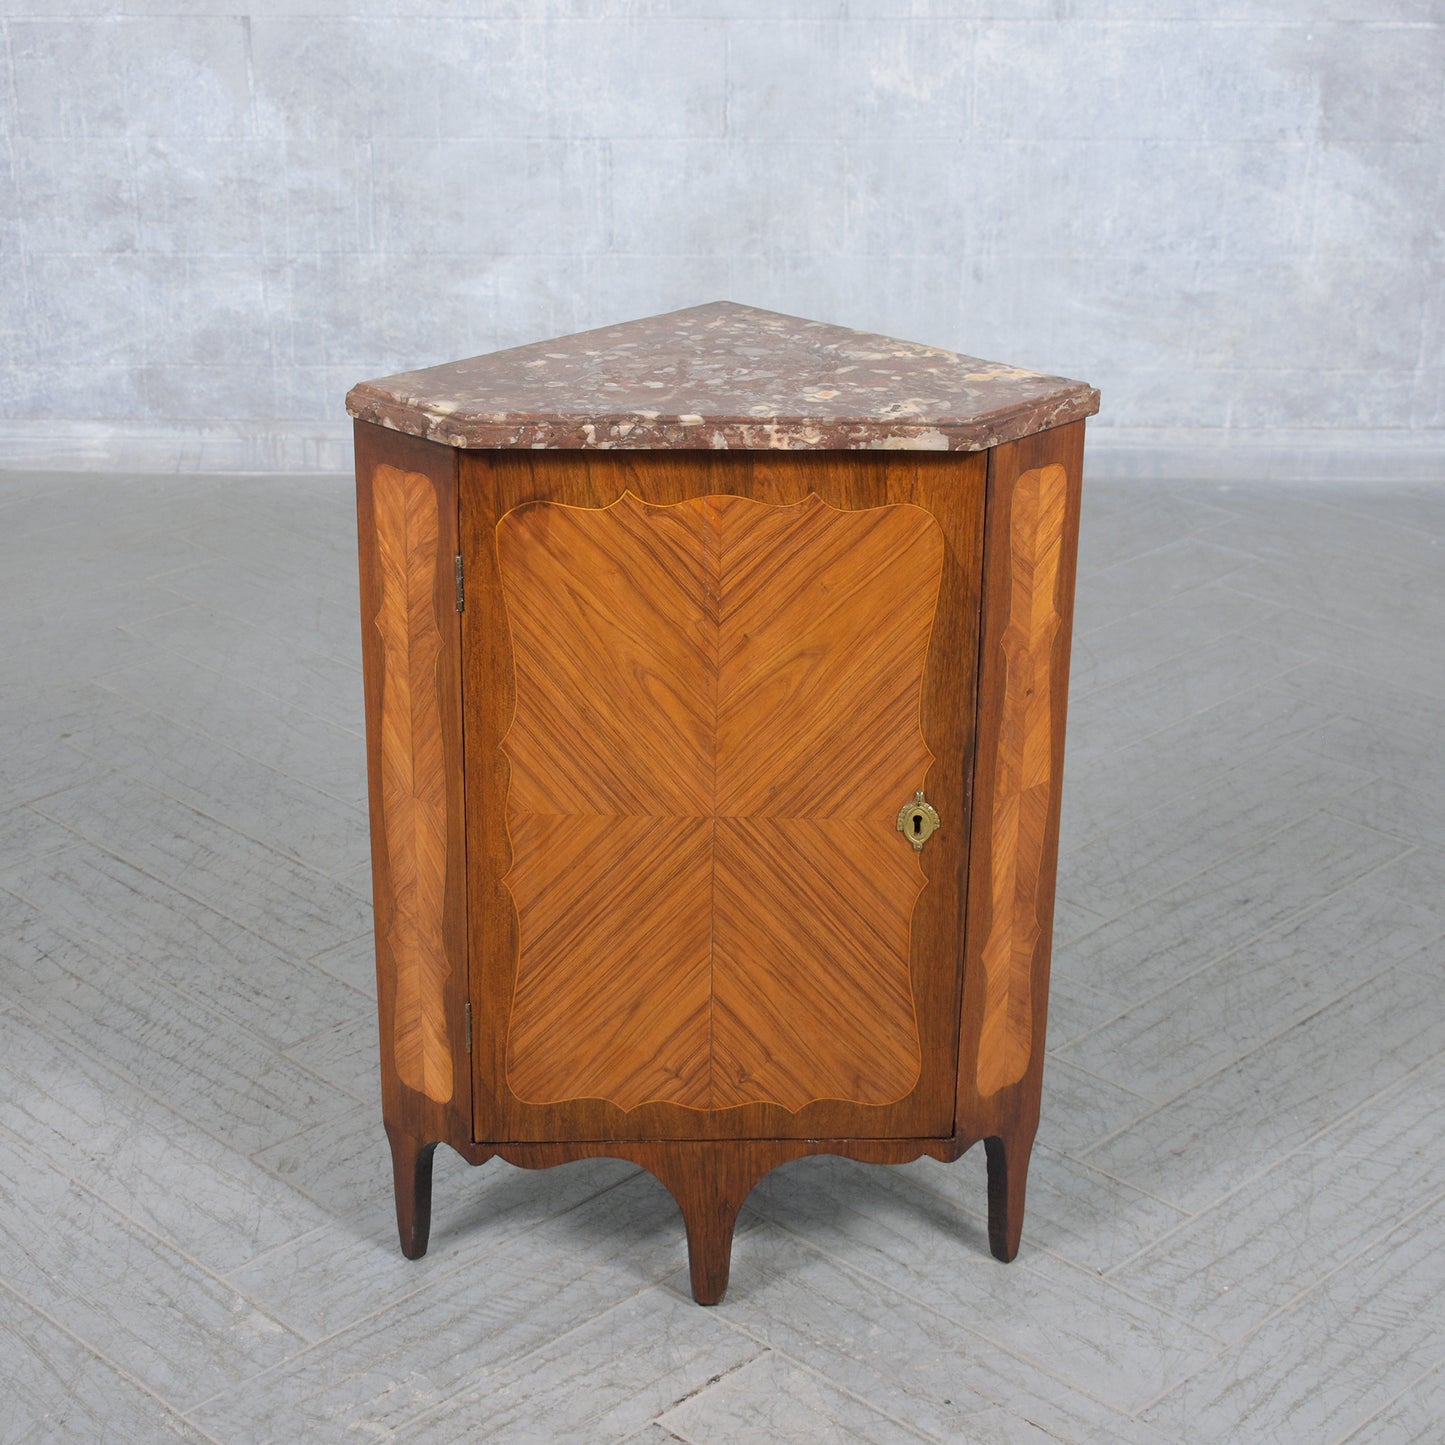 Late 18th-Century French Corner Cabinets with Marble Tops: Restored Elegance